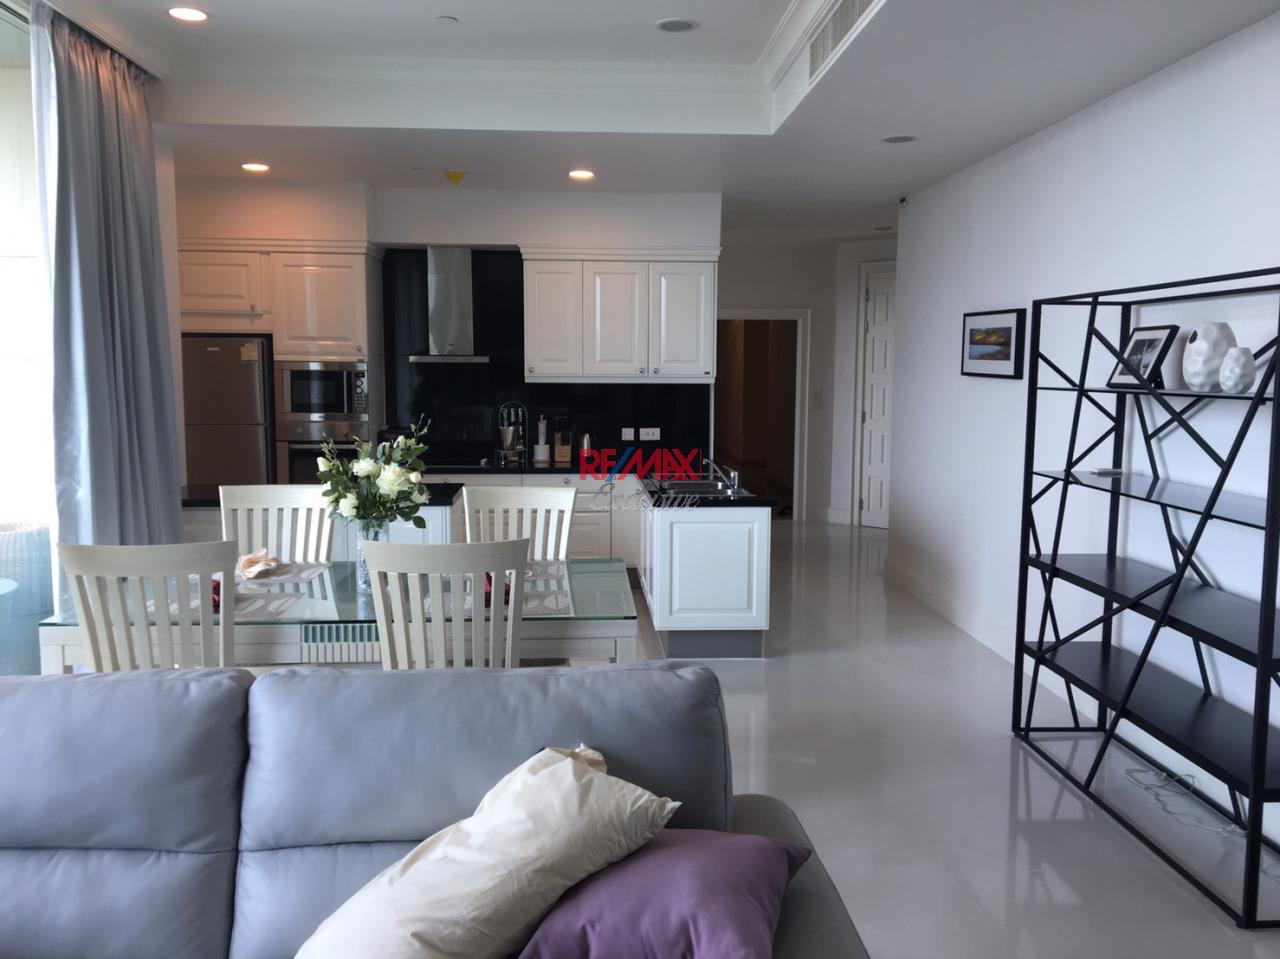 RE/MAX Exclusive Agency's ROYCE RESIDENCE, 2 BEDROOM, 112 SQM - FOR RENT 80,000 THB 8